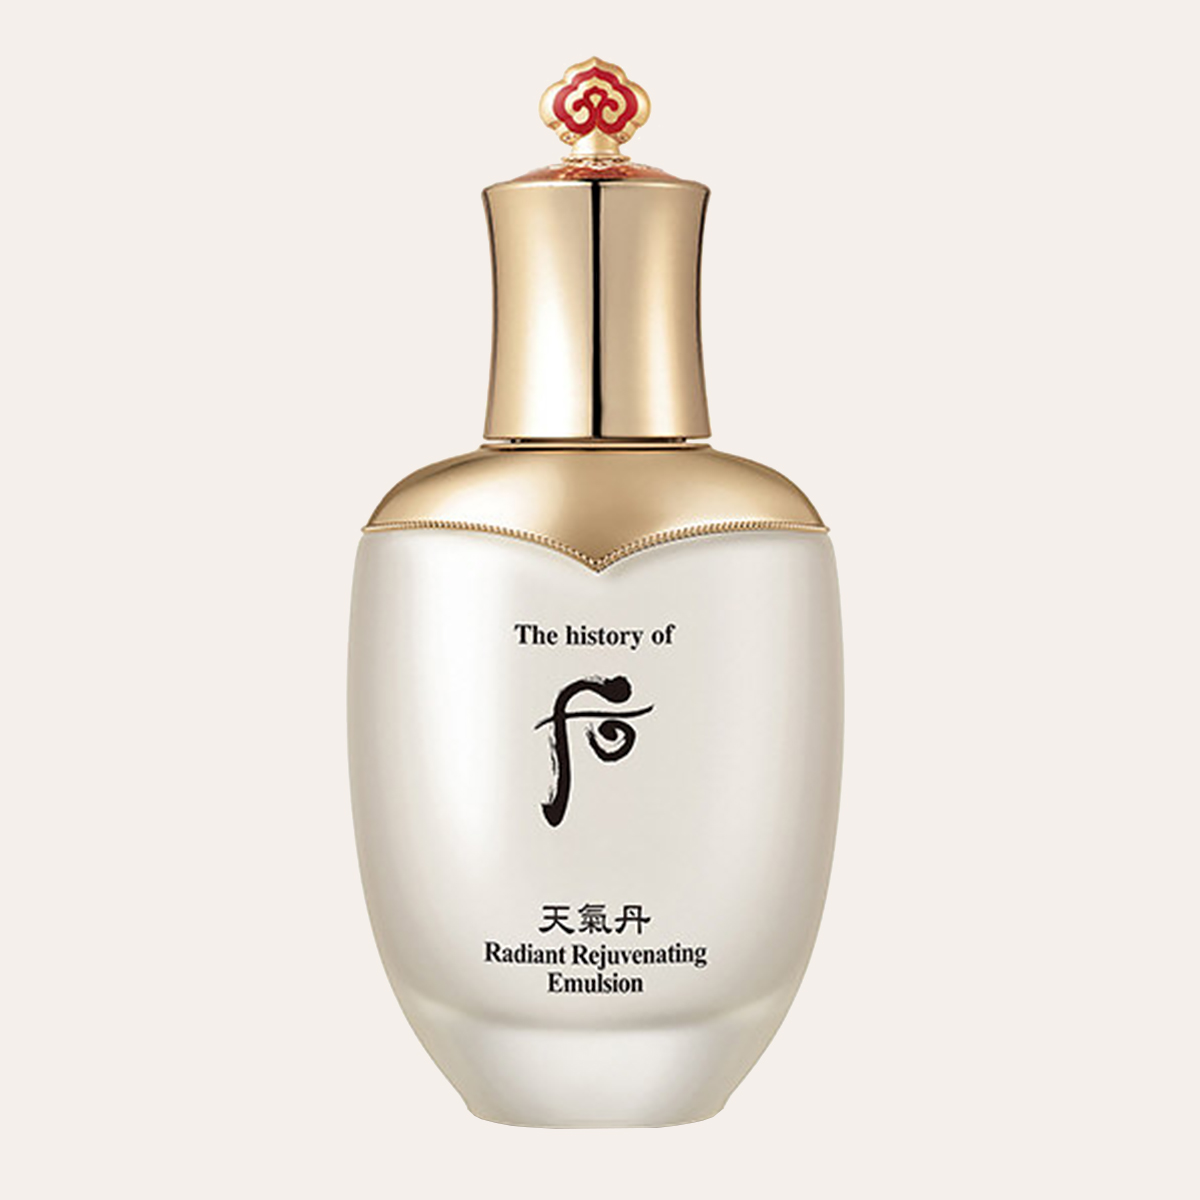 The History Of Whoo - Cheongidan Line - The Monodist By Odile Monod